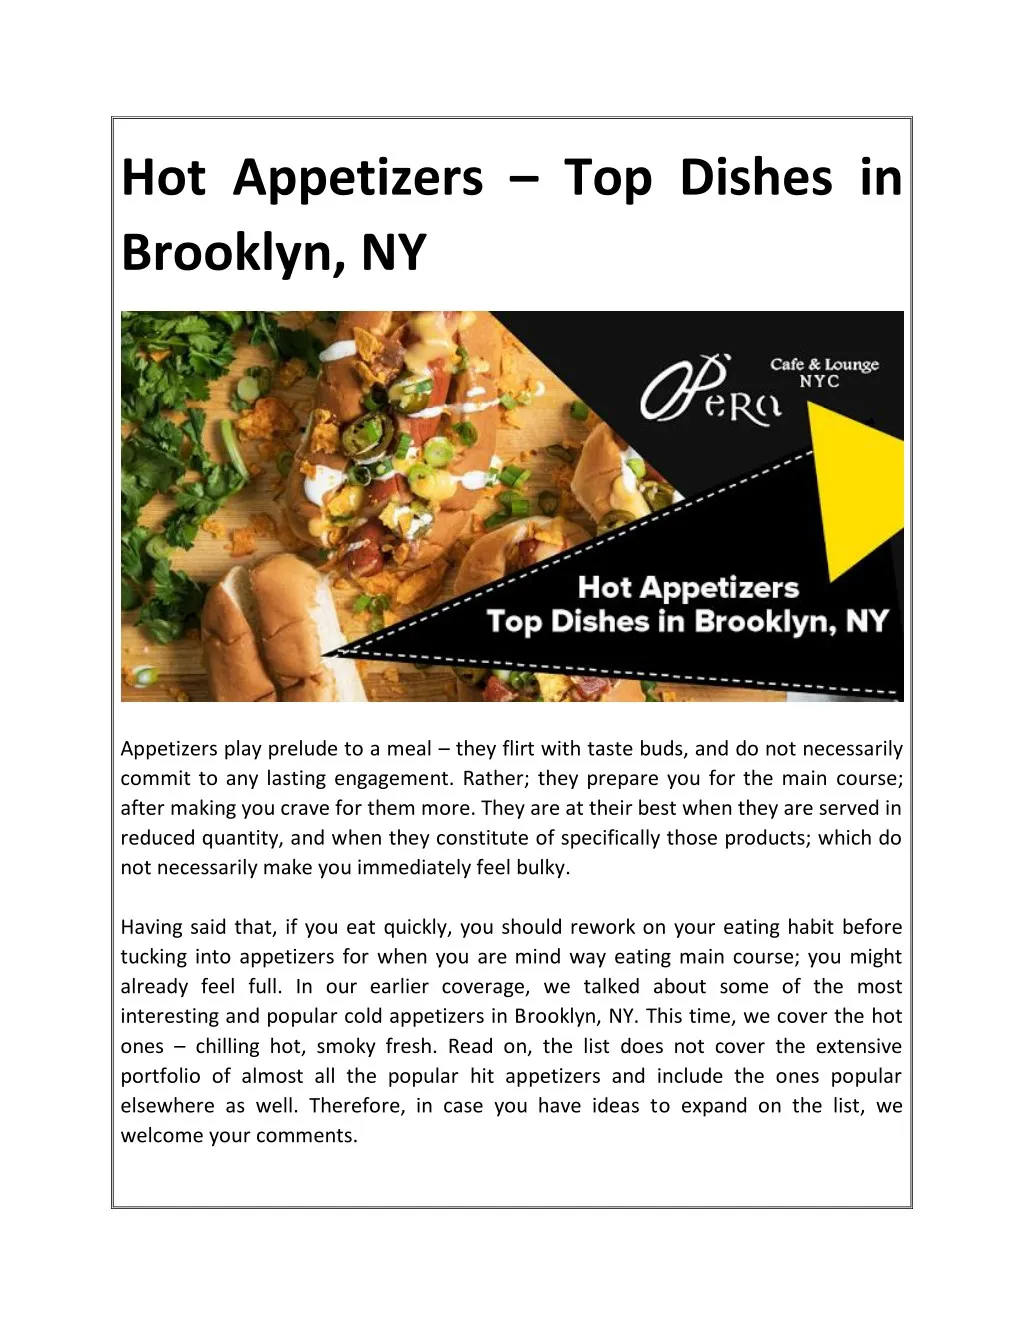 hot appetizers top dishes in brooklyn ny